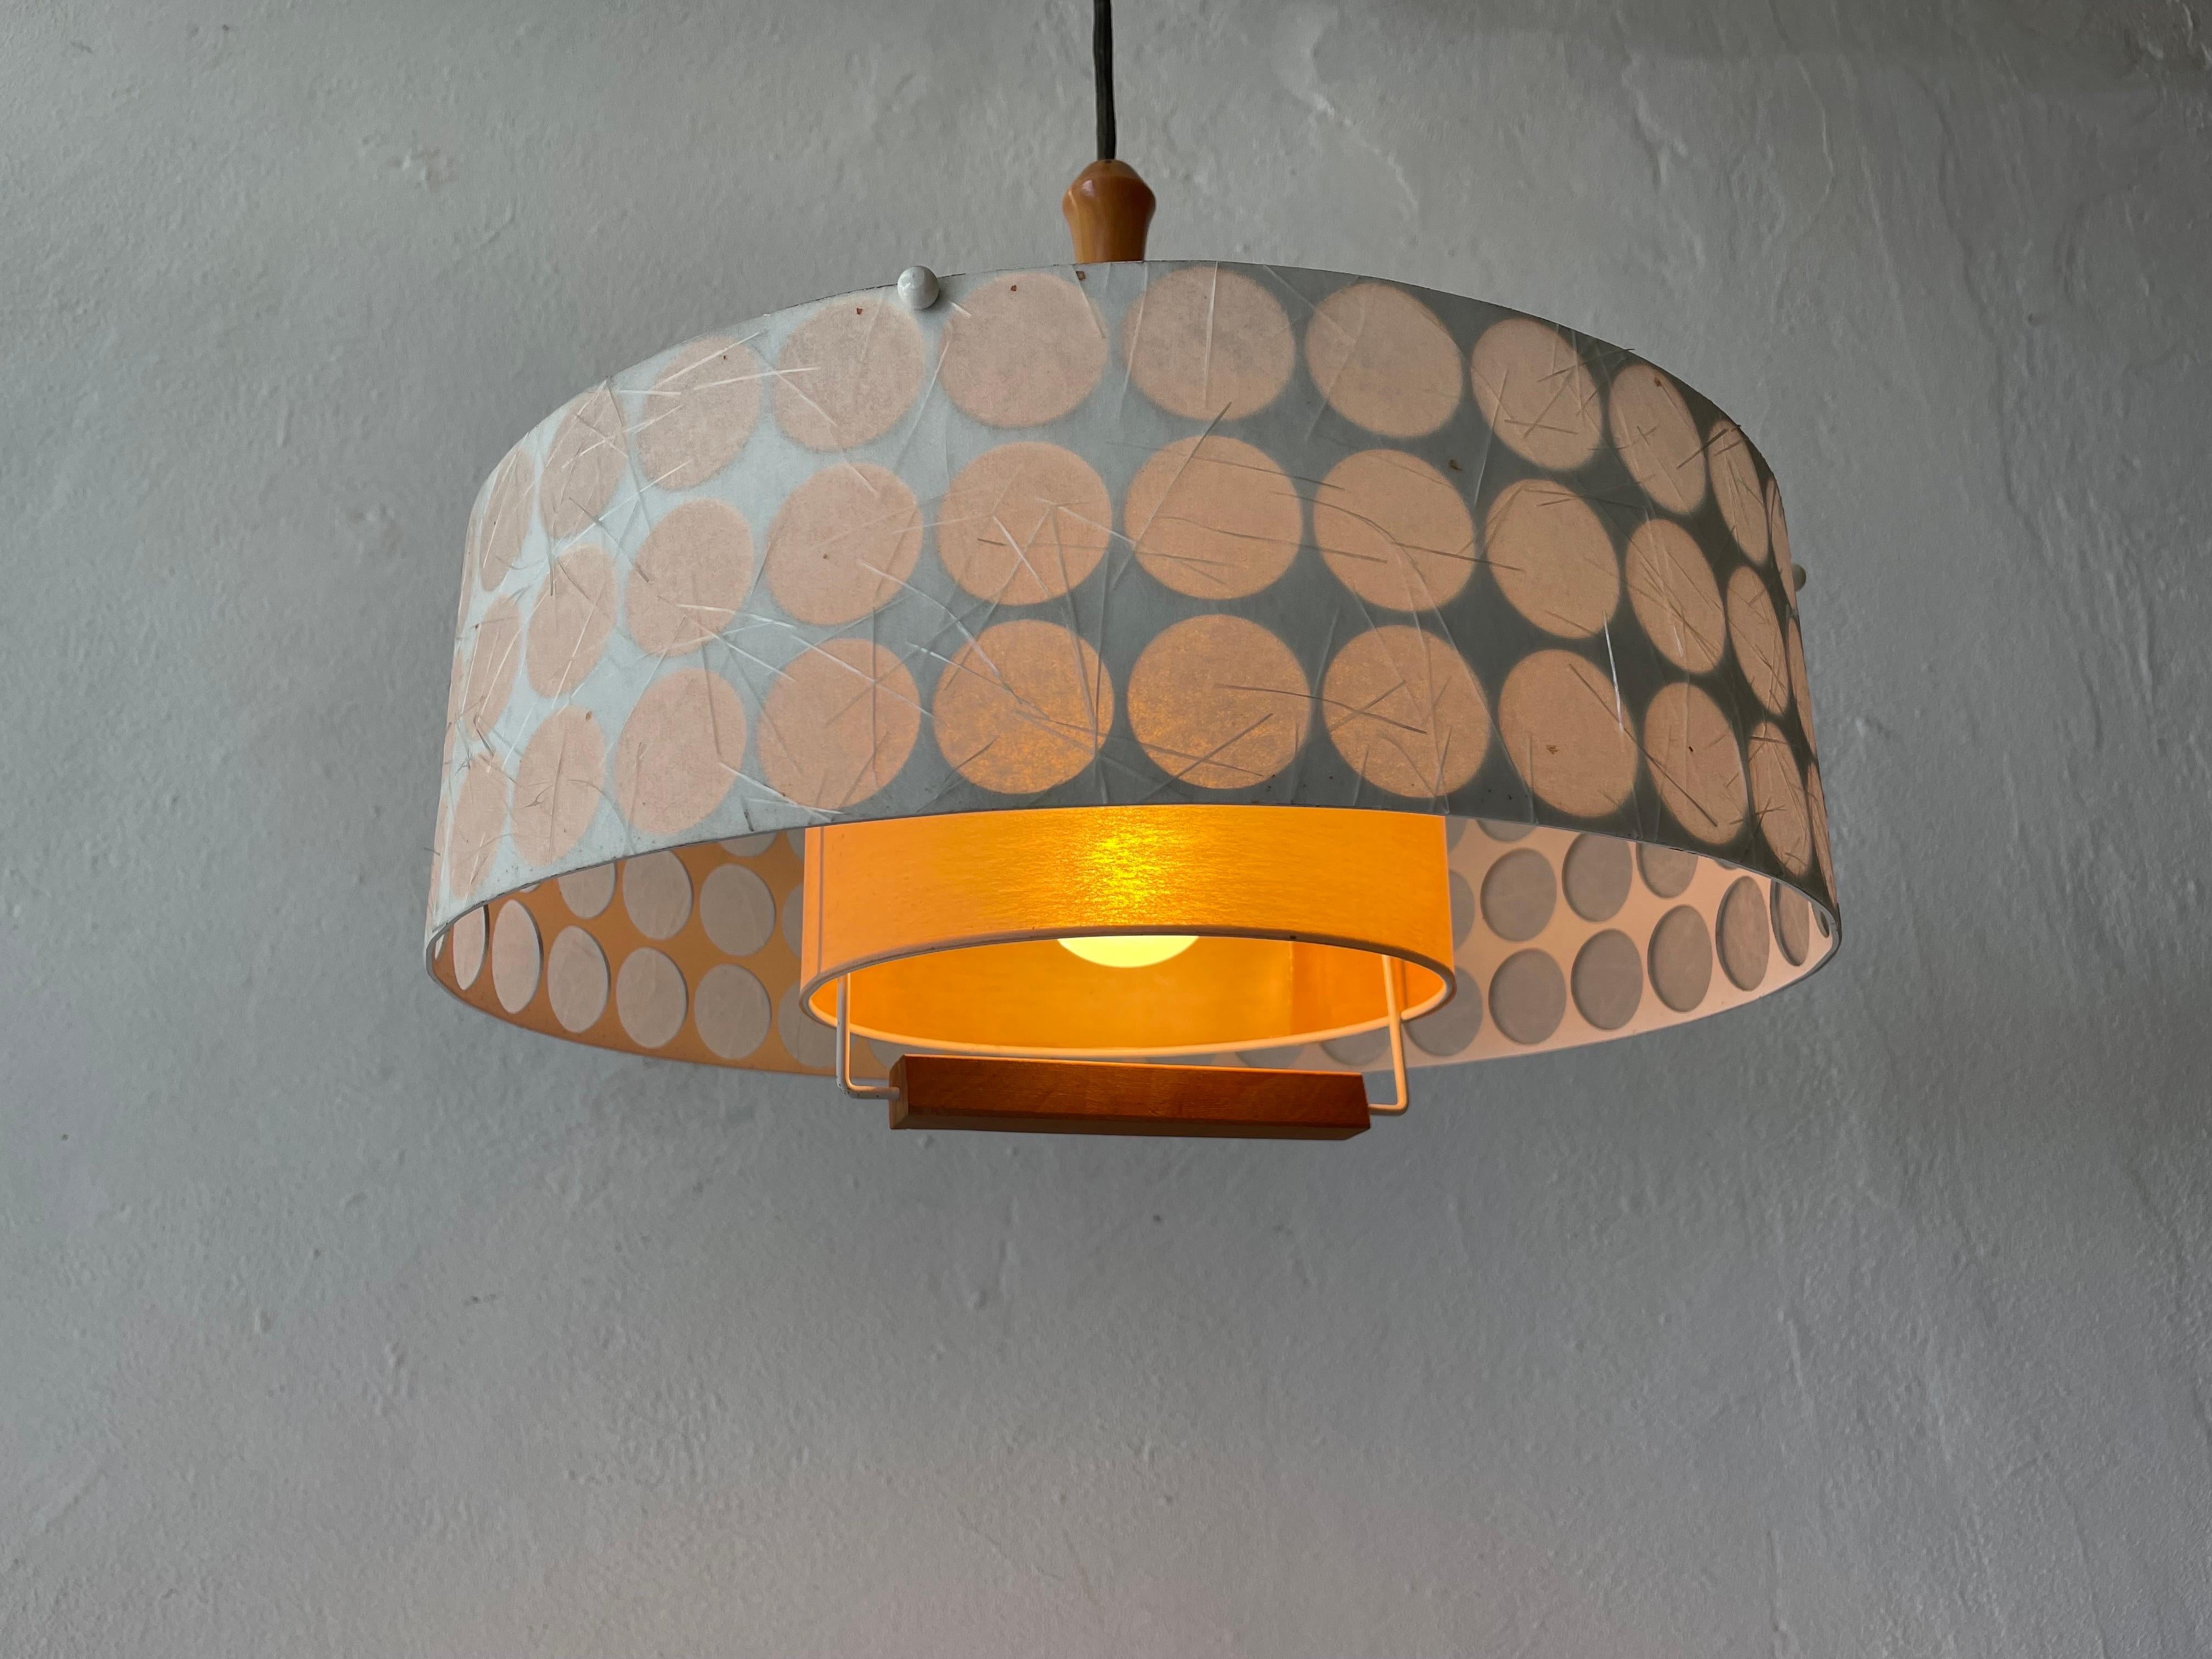 Rare Atomic Shade Pendant Lamp by Temde, 1960s, Switzerland For Sale 4